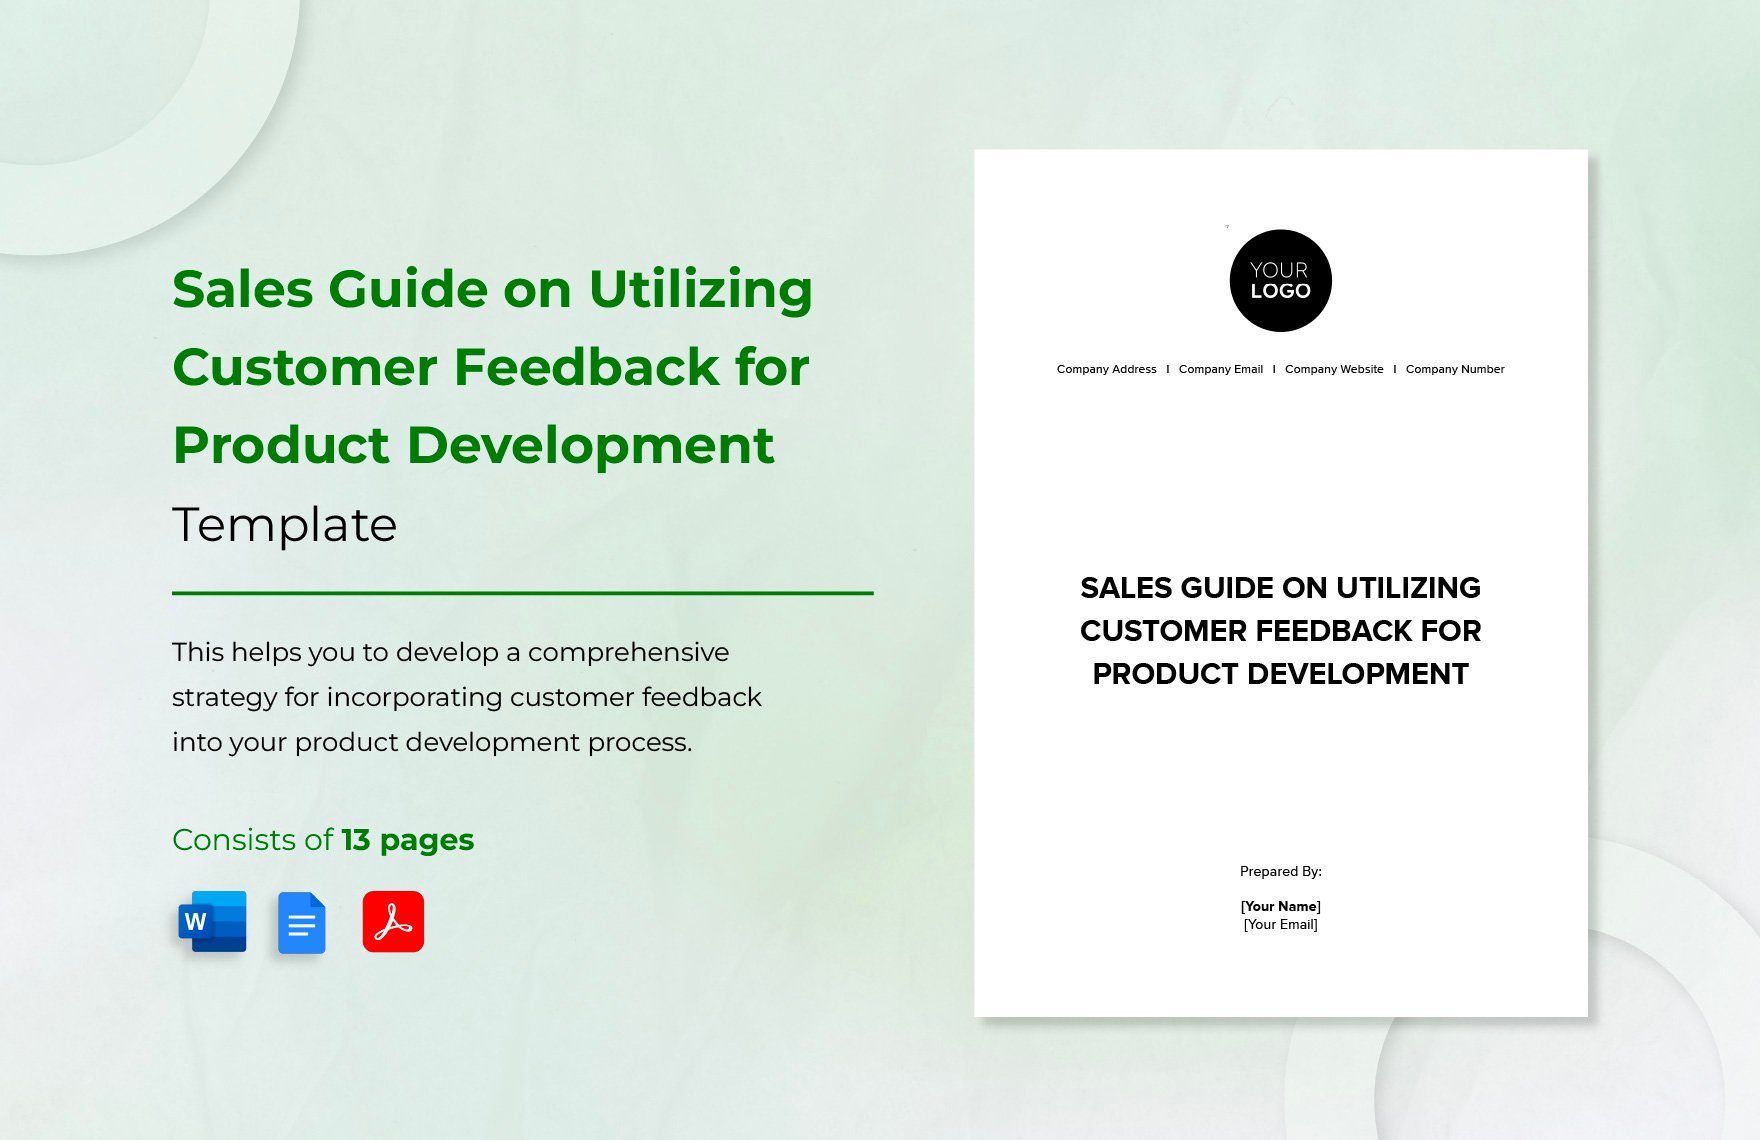 Sales Guide on Utilizing Customer Feedback for Product Development